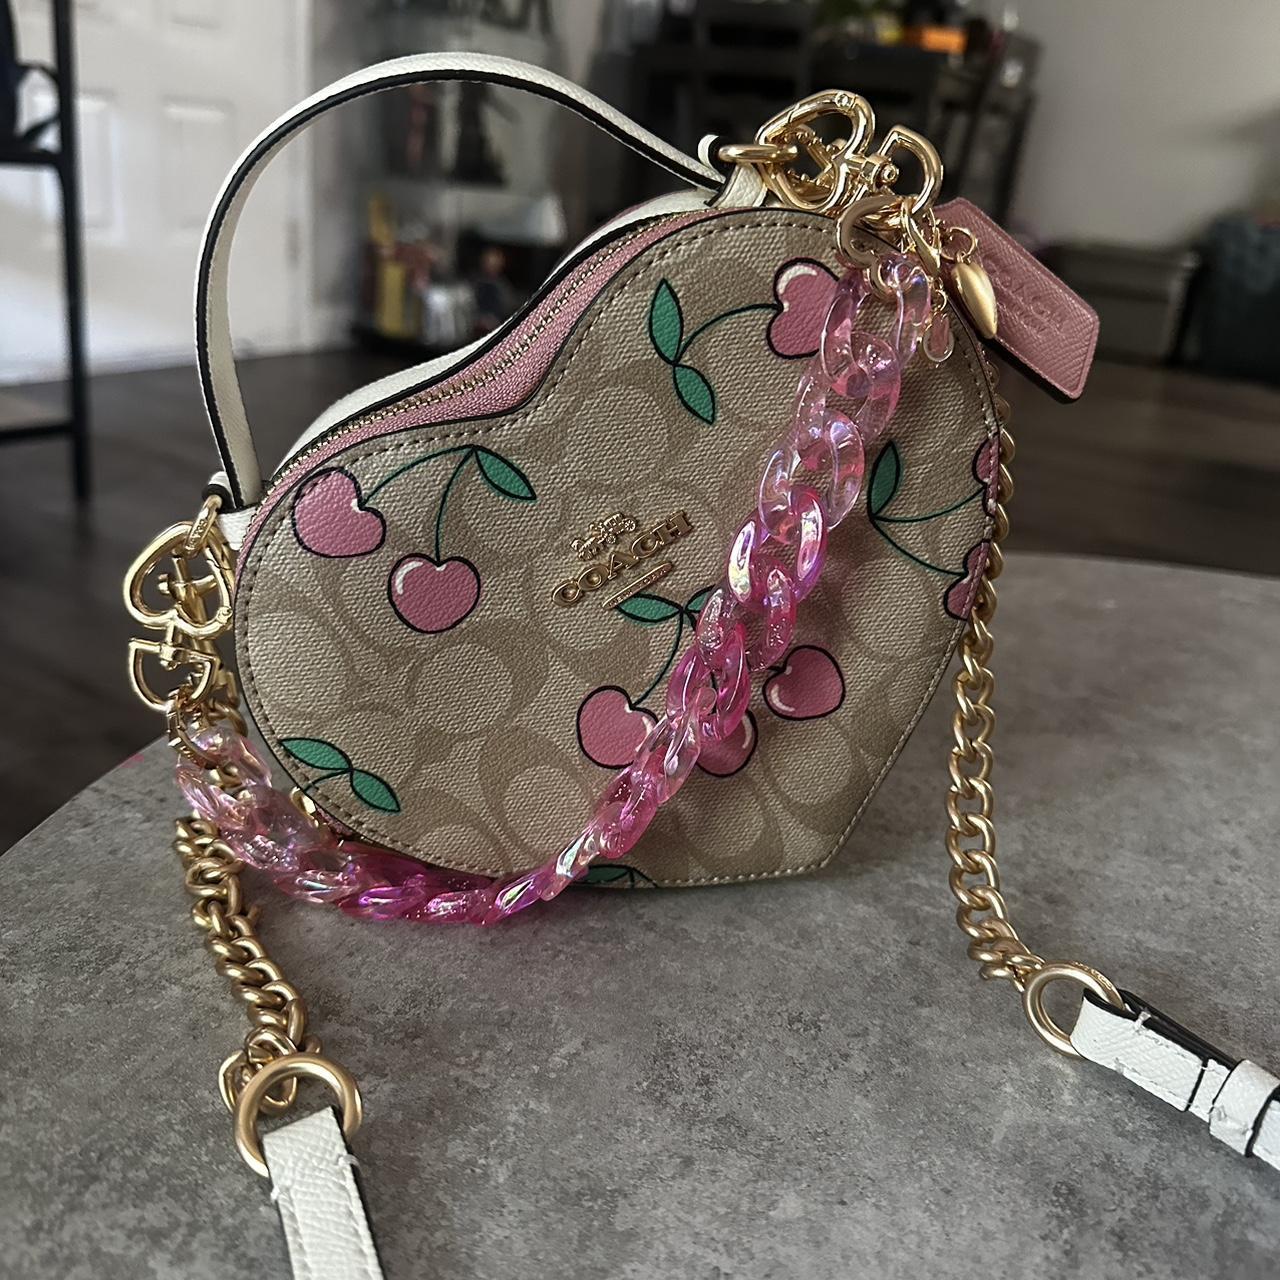 HEART COIN CASE IN SIGNATURE LEATHER (COACH - Depop